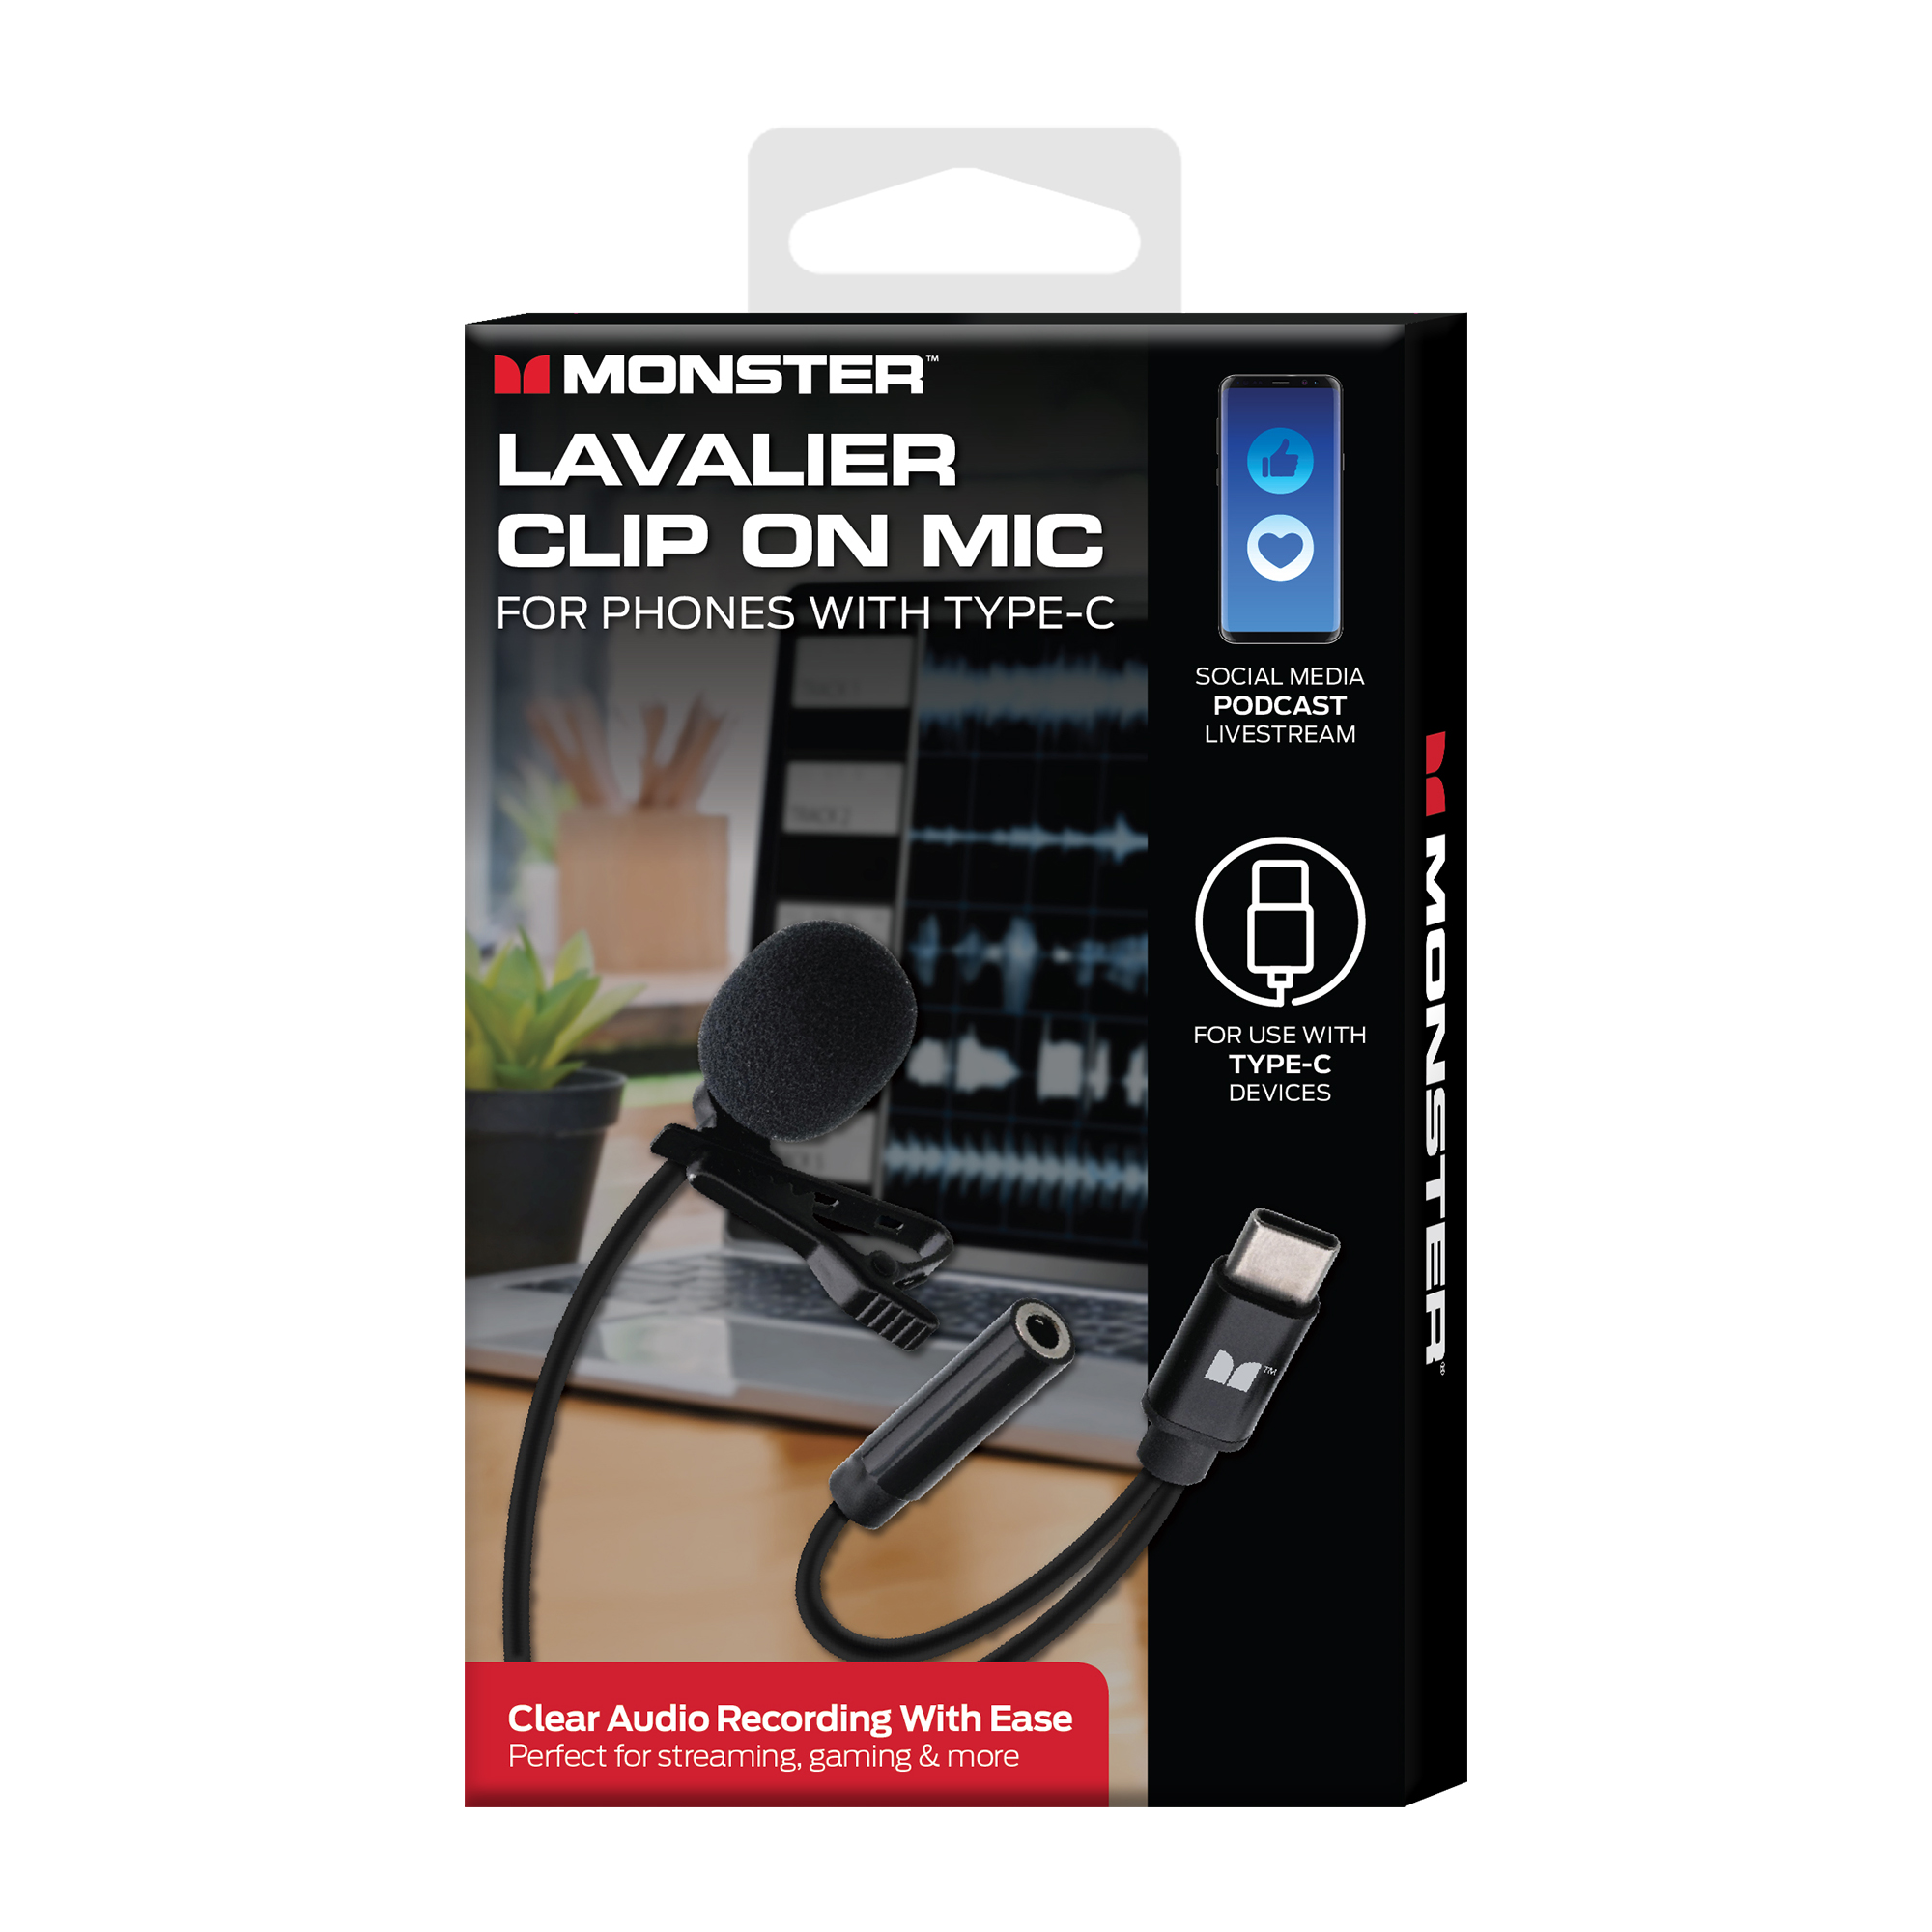 Monster Lavalier Clip-on Microphone, Mic For Type-C USB Ports, Universal Device Support - image 1 of 5